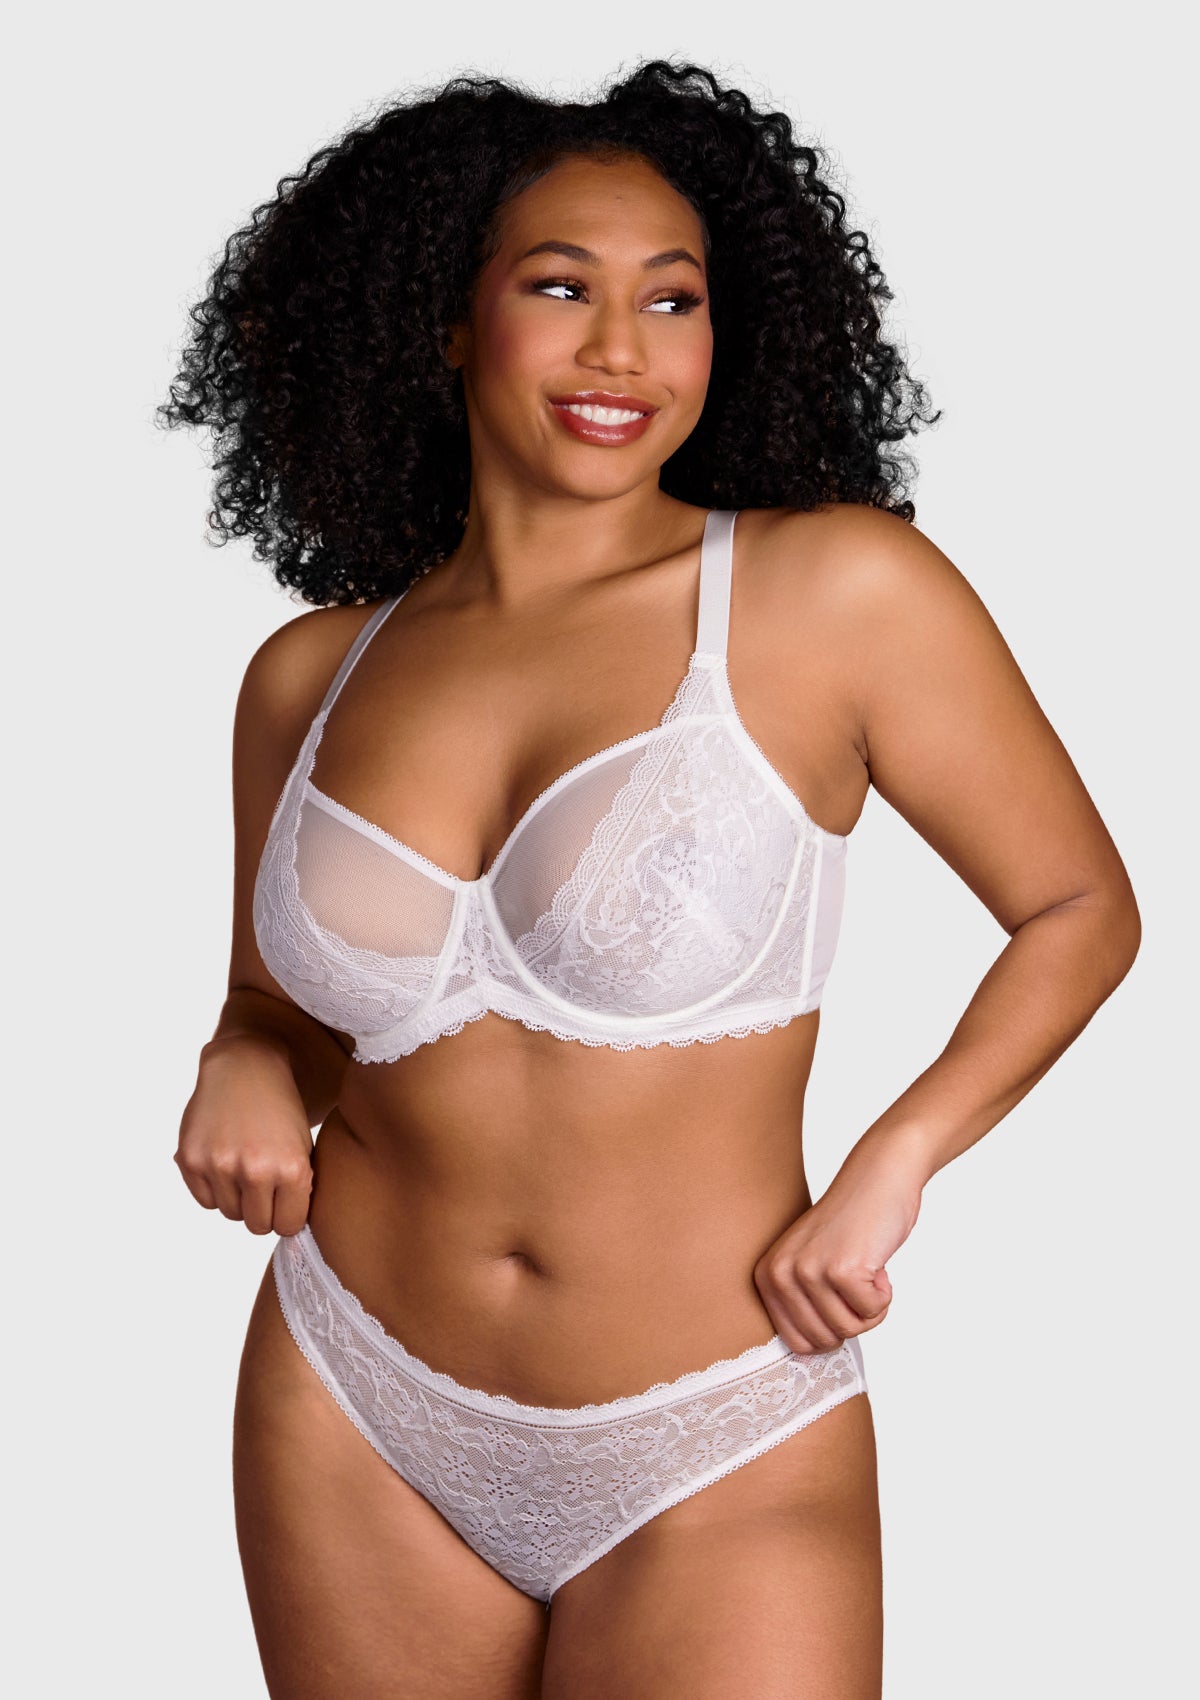 HSIA Anemone Big Bra: Best Bra For Lift And Support, Floral Bra - White / 38 / C